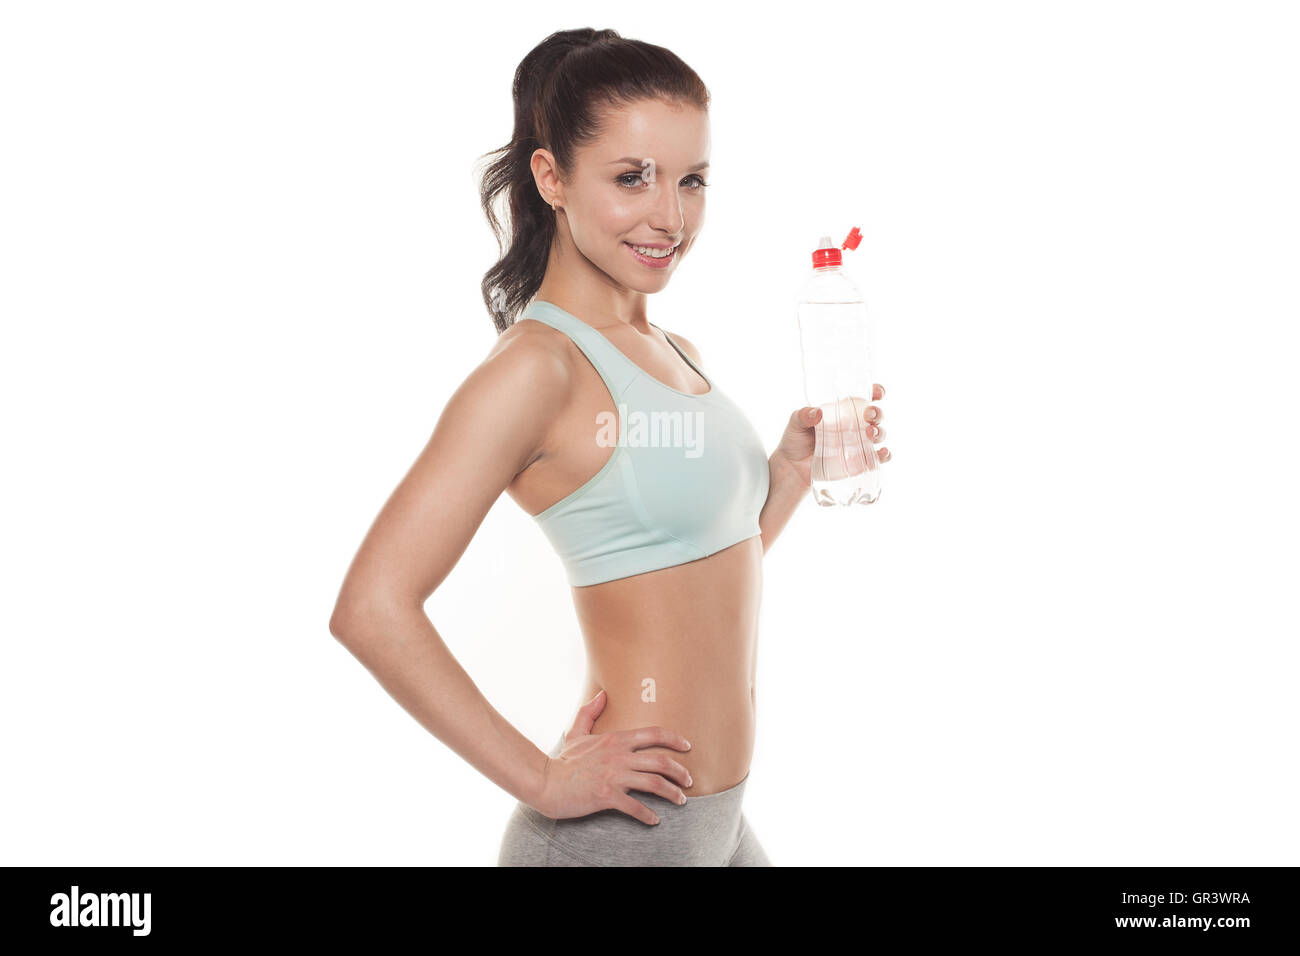 Sporty girl drinking water from a bottle after a workout, fitness training, isolated on white background Stock Photo